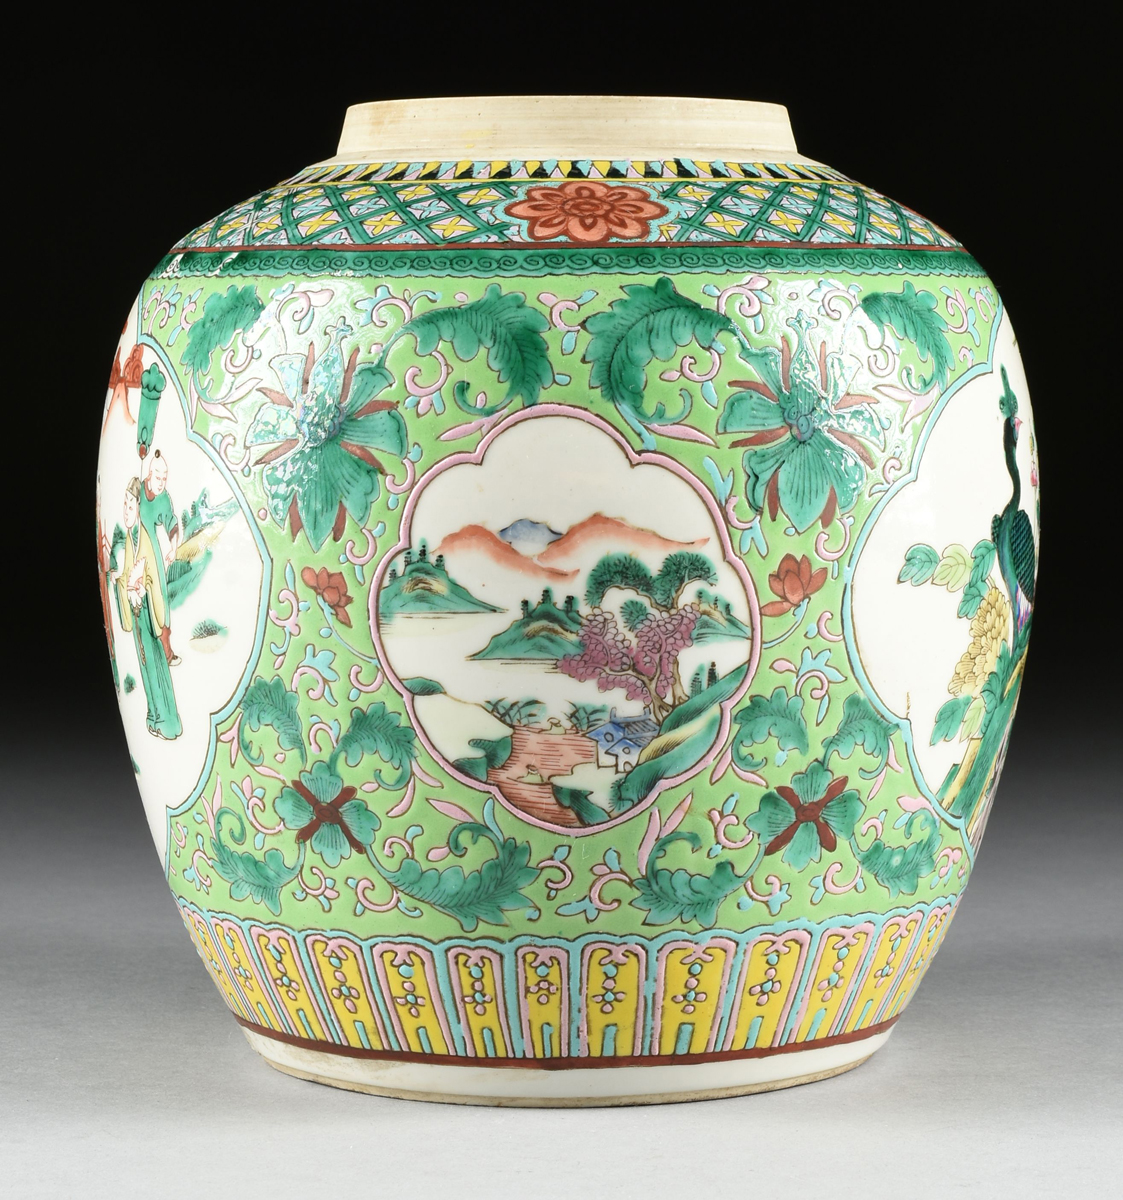 A PAIR OF CHINESE "FAMILLE VERTE" PORCELAIN GINGER JARS WITH LIDS, REPUBLIC PERIOD CIRCA 1917- - Image 9 of 14